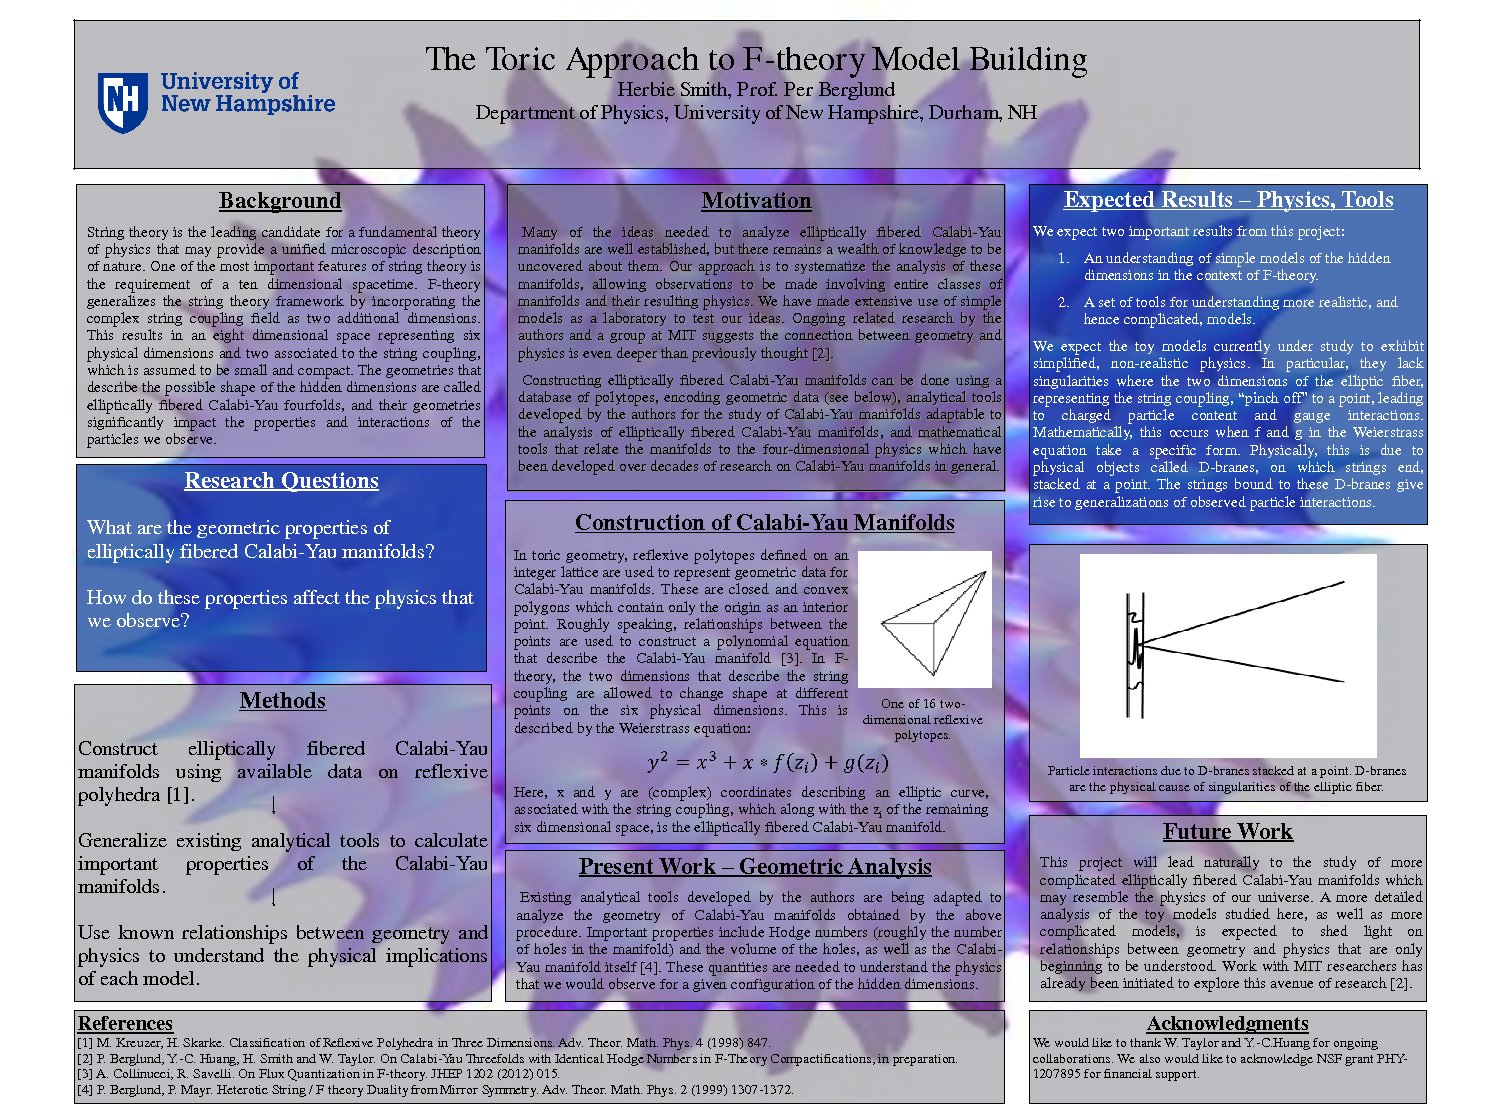 The Toric Approach To F-Theory Model Building by hlk25